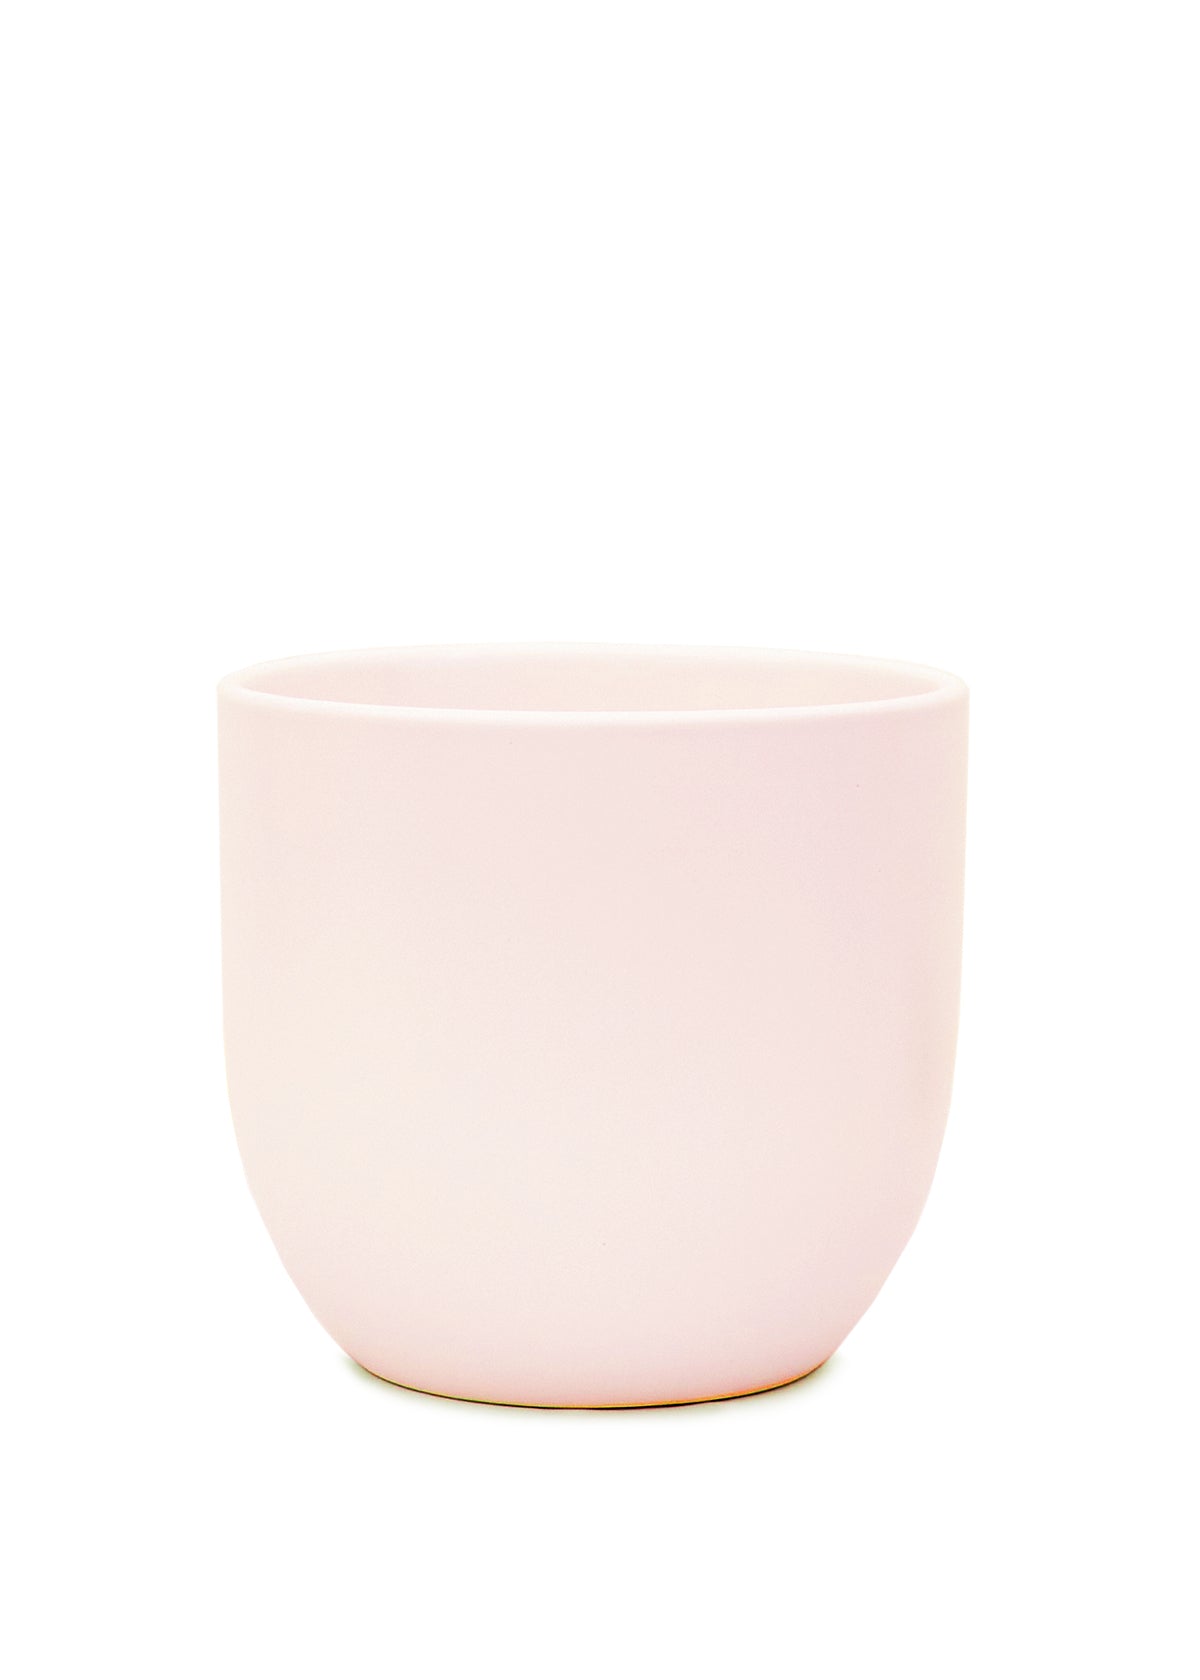 Rounded Ceramic Planter, Pink 5" Wide